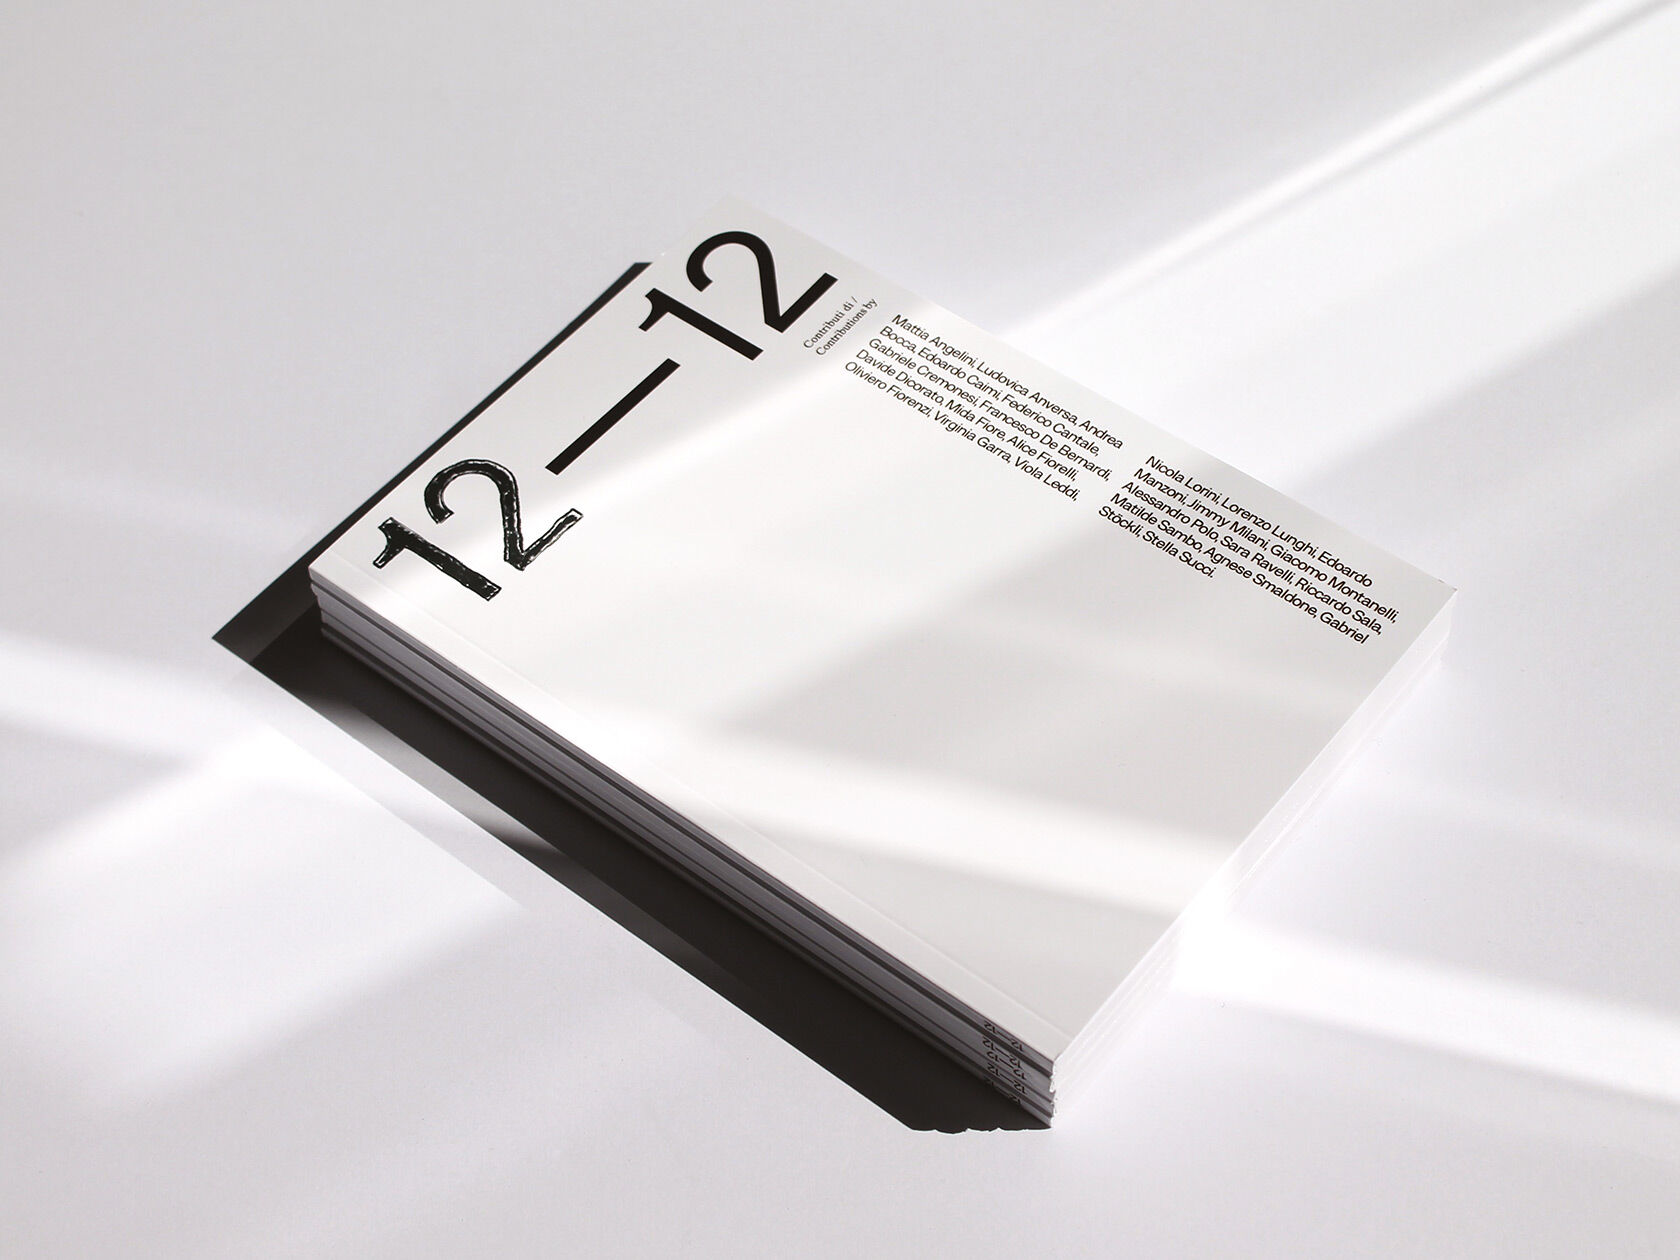 Paola Bombelli’s book “12—12” invites 24 artists to explore our understanding of time